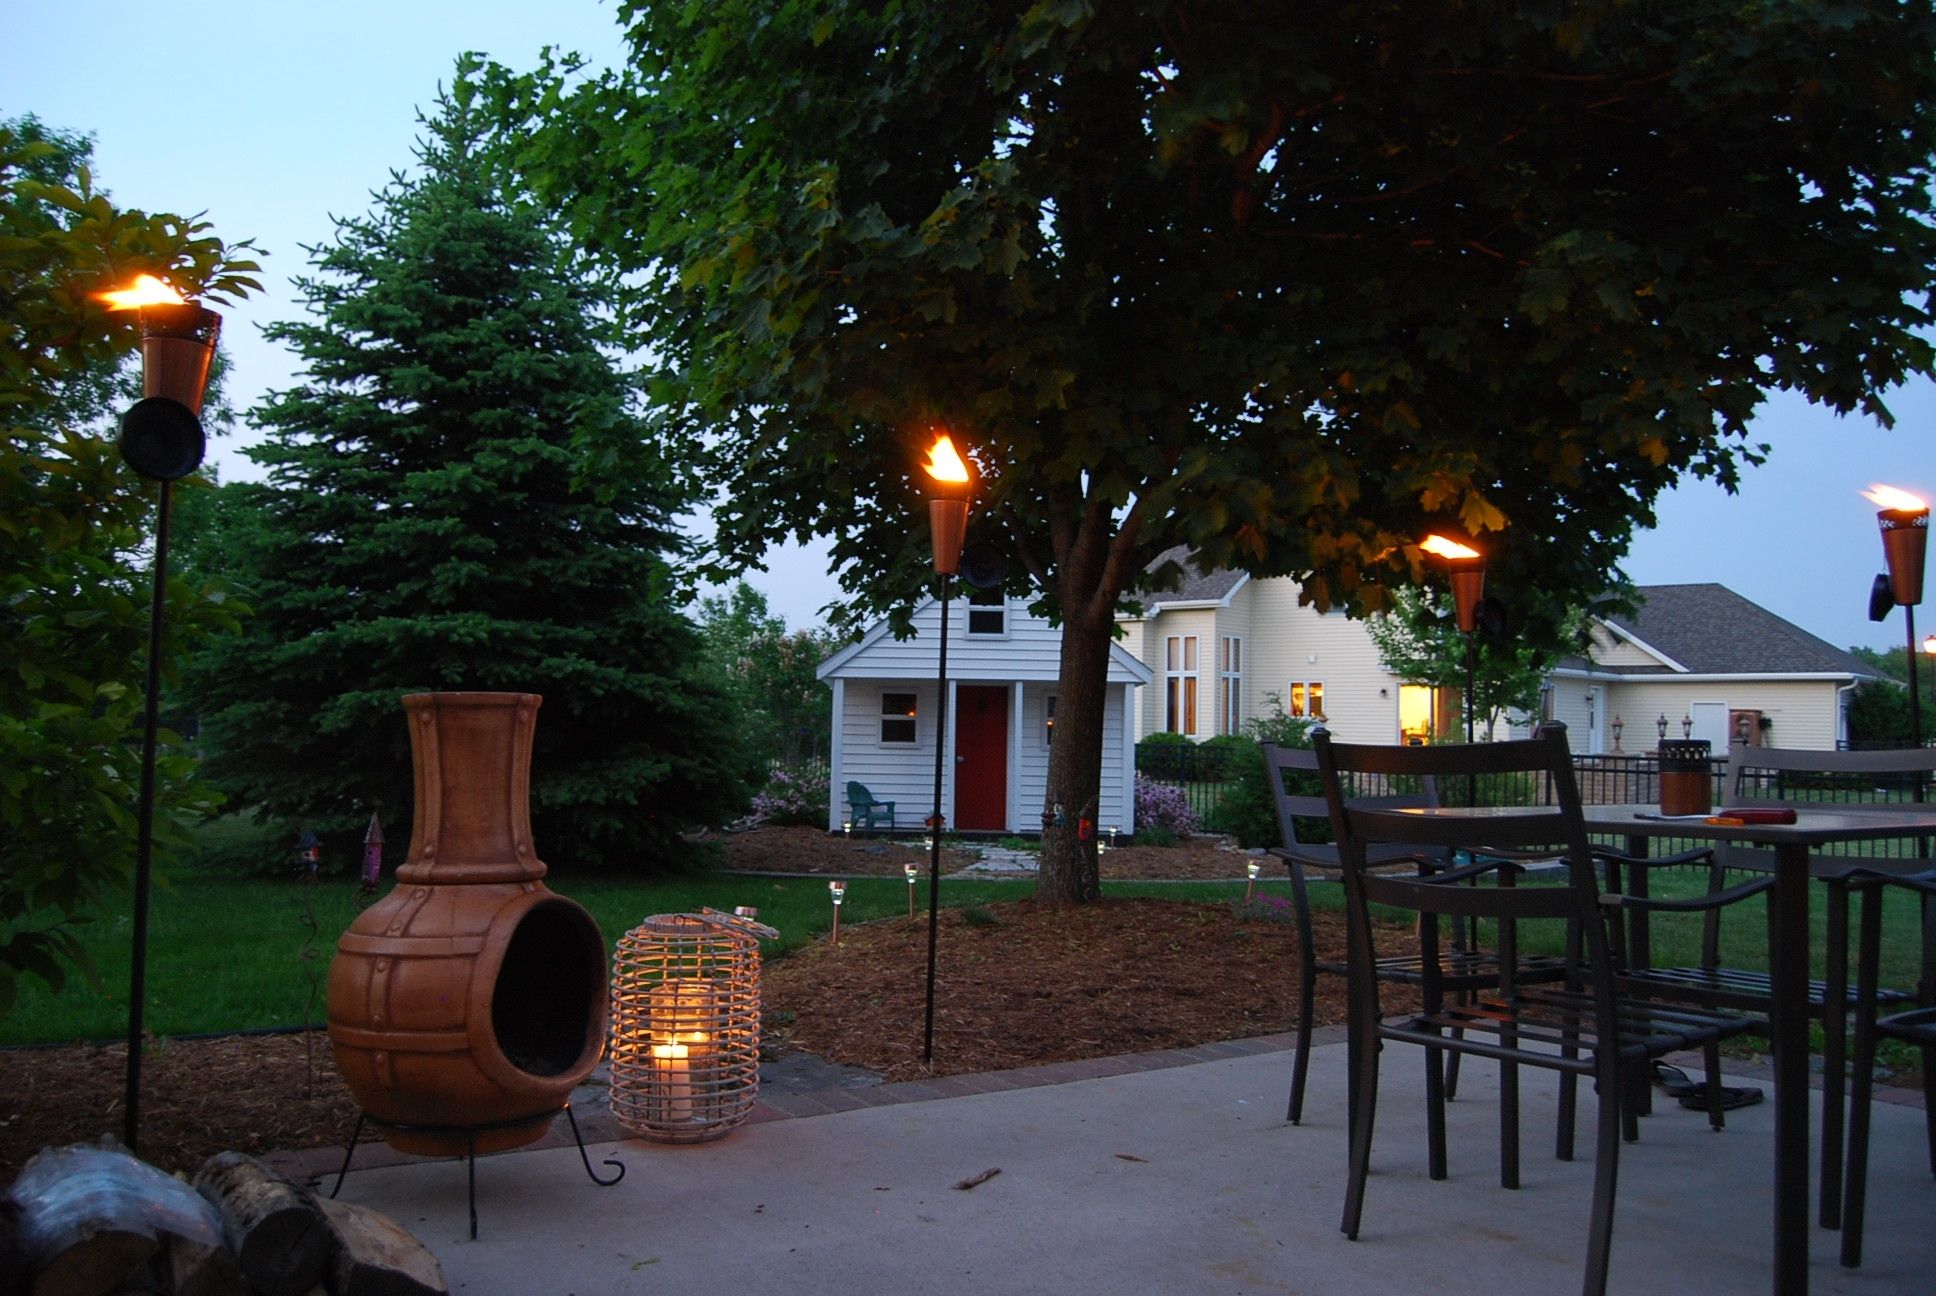 Patio Torches New Propane Tiki Torches For Sale Led Flame Lamp Intended For Outdoor Tiki Lanterns (View 15 of 20)